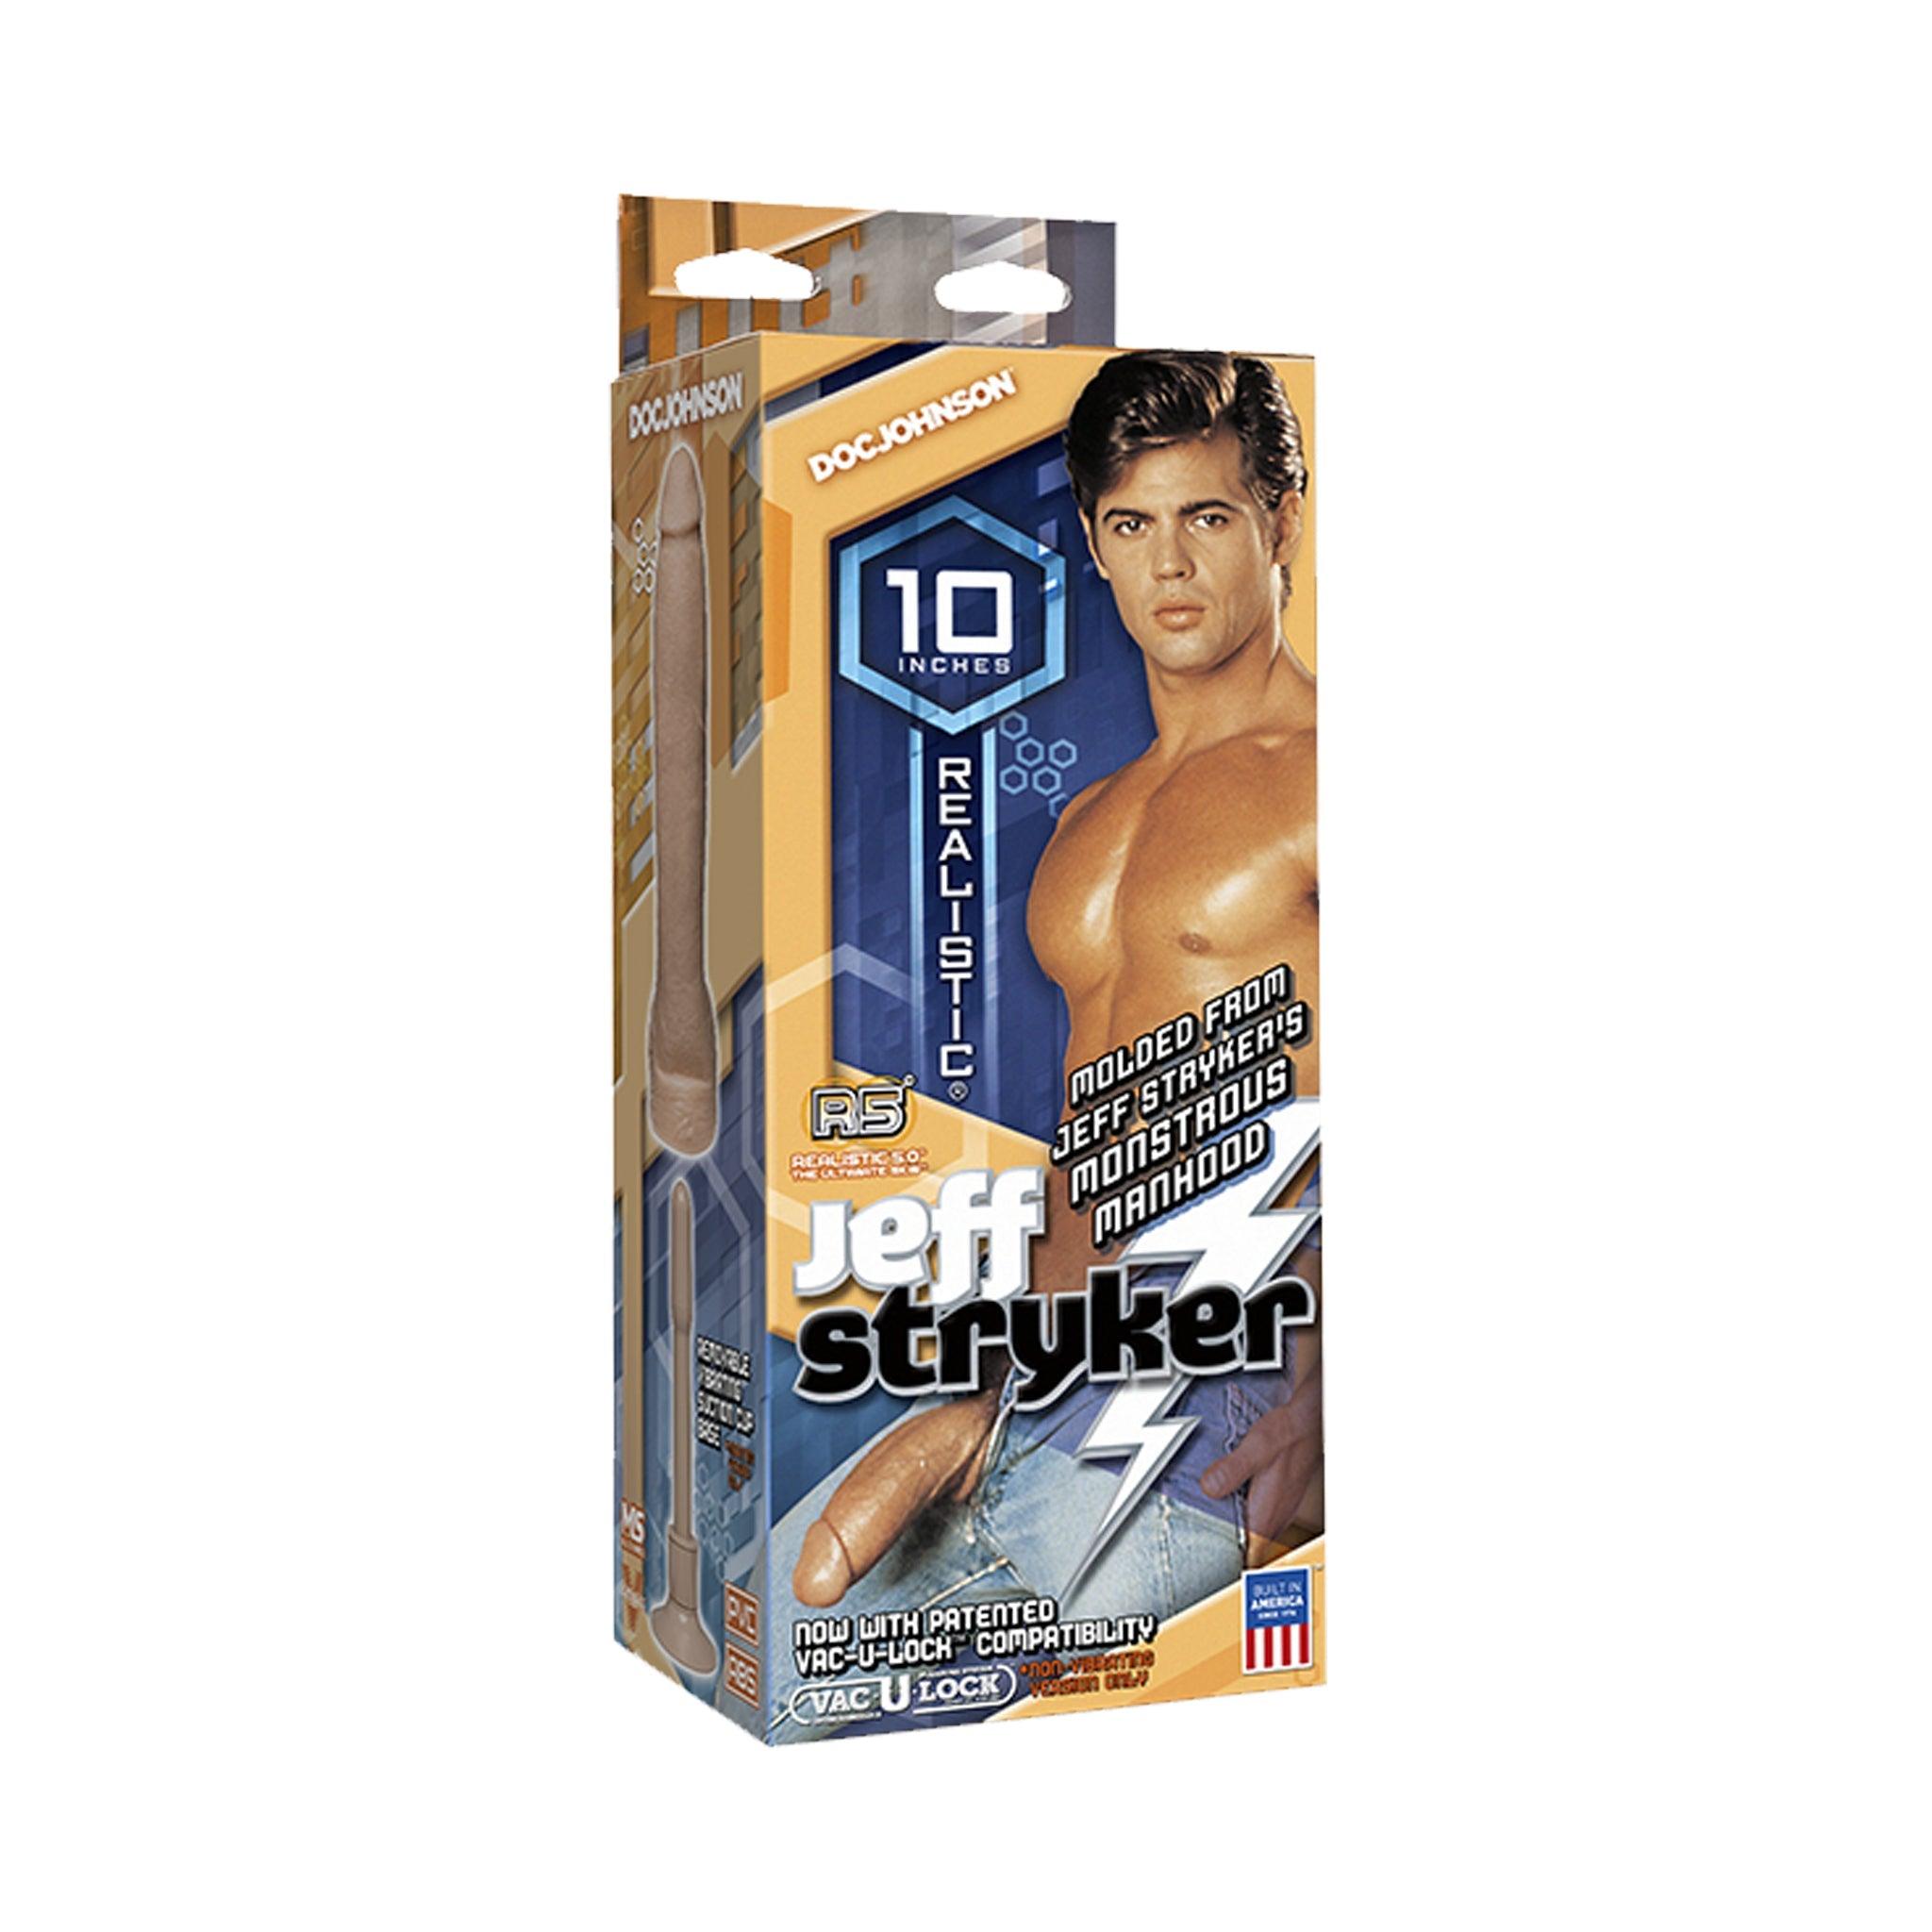 Jeff Stryker 10" Realistic - Multi-Speed Vibrating Dong - CheapLubes.com